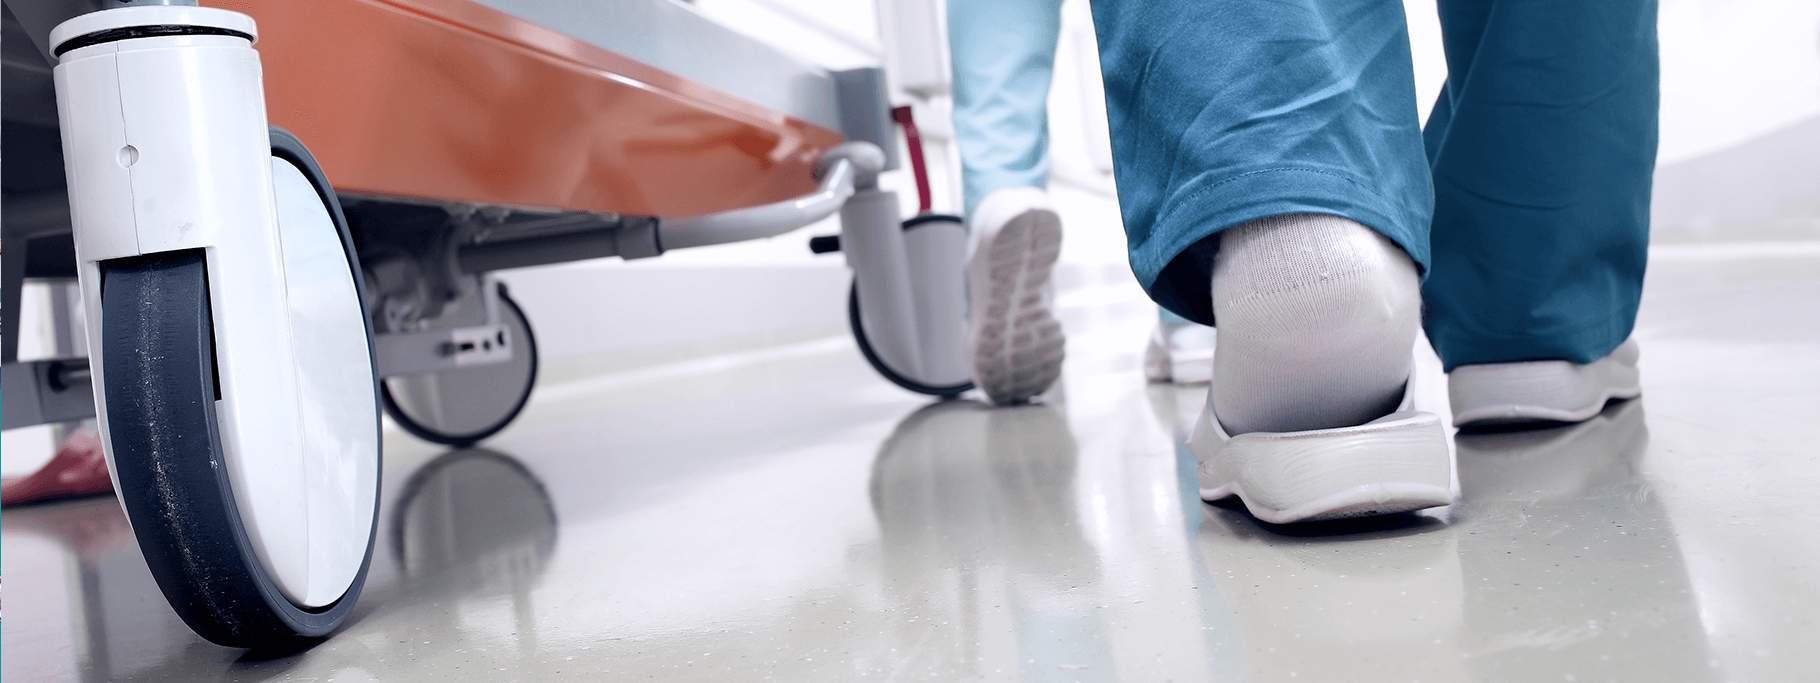 When a Catastrophic Injury Causes Permanent Disability